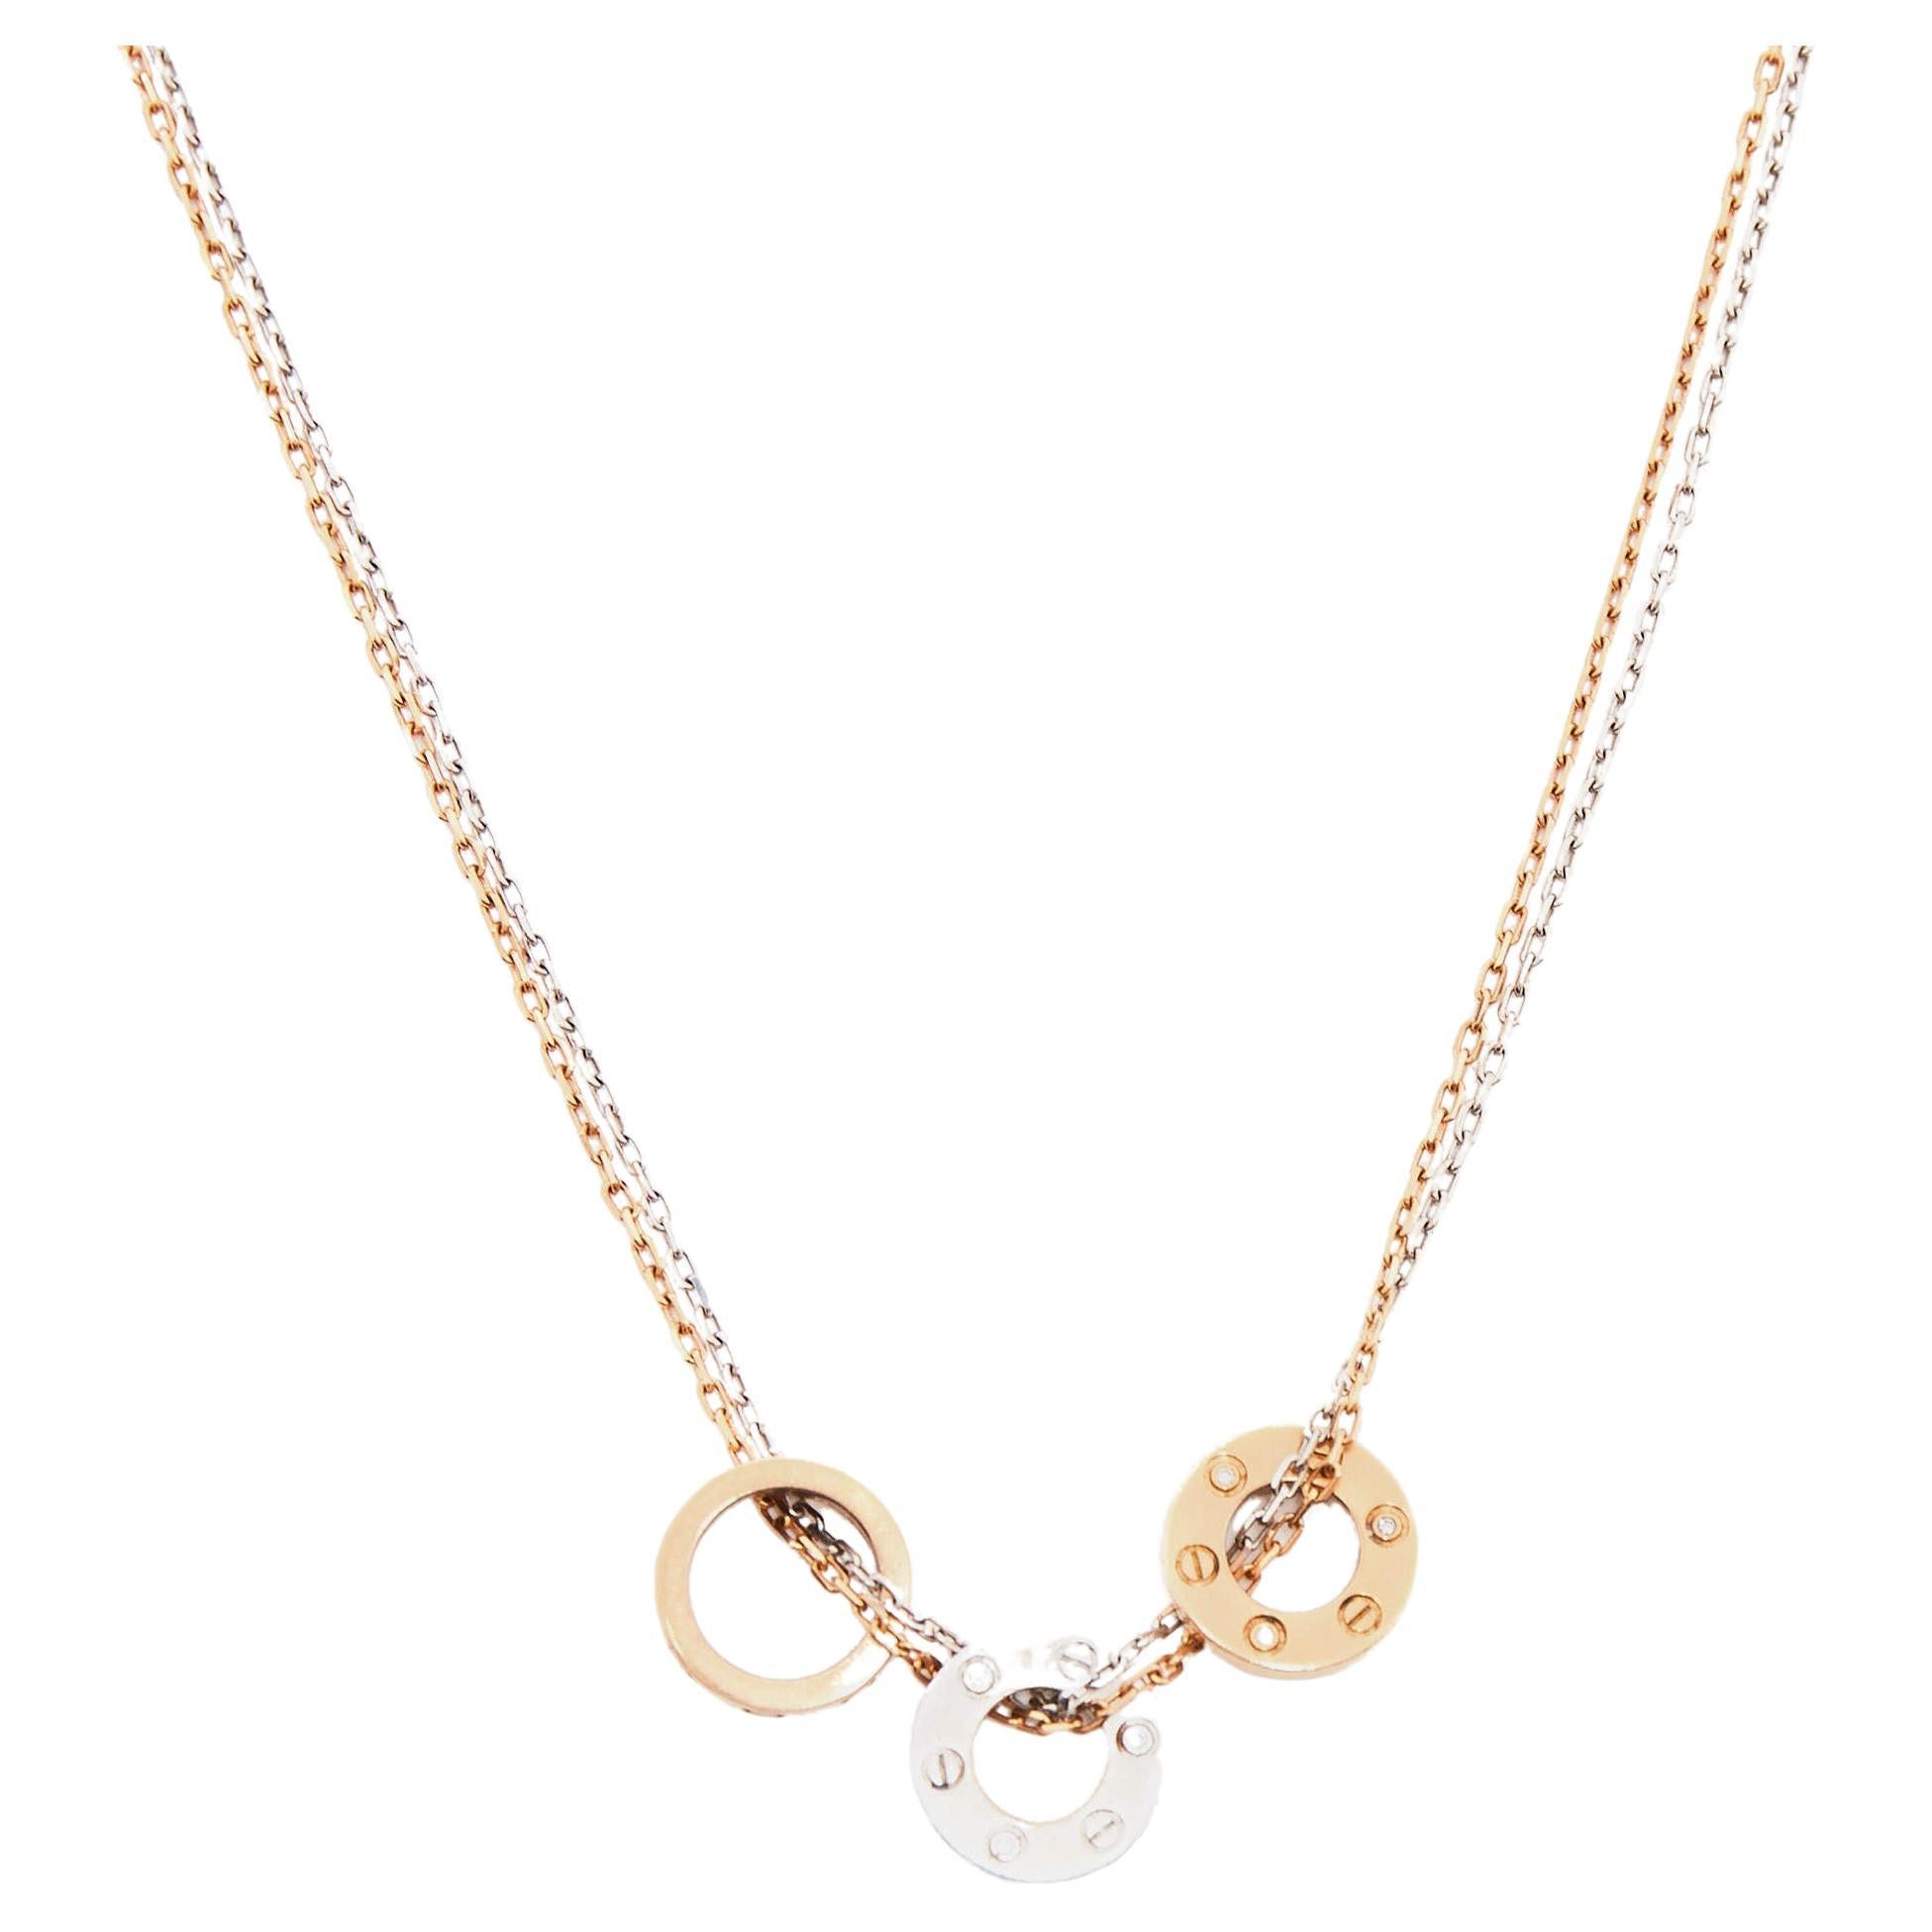 The Cartier Love necklace is a luxurious and elegant piece of jewelry. Made from 18k gold, it features a double-chain design that adds a modern touch. The necklace is adorned with sparkling diamonds, adding a dazzling and glamorous element. It is a